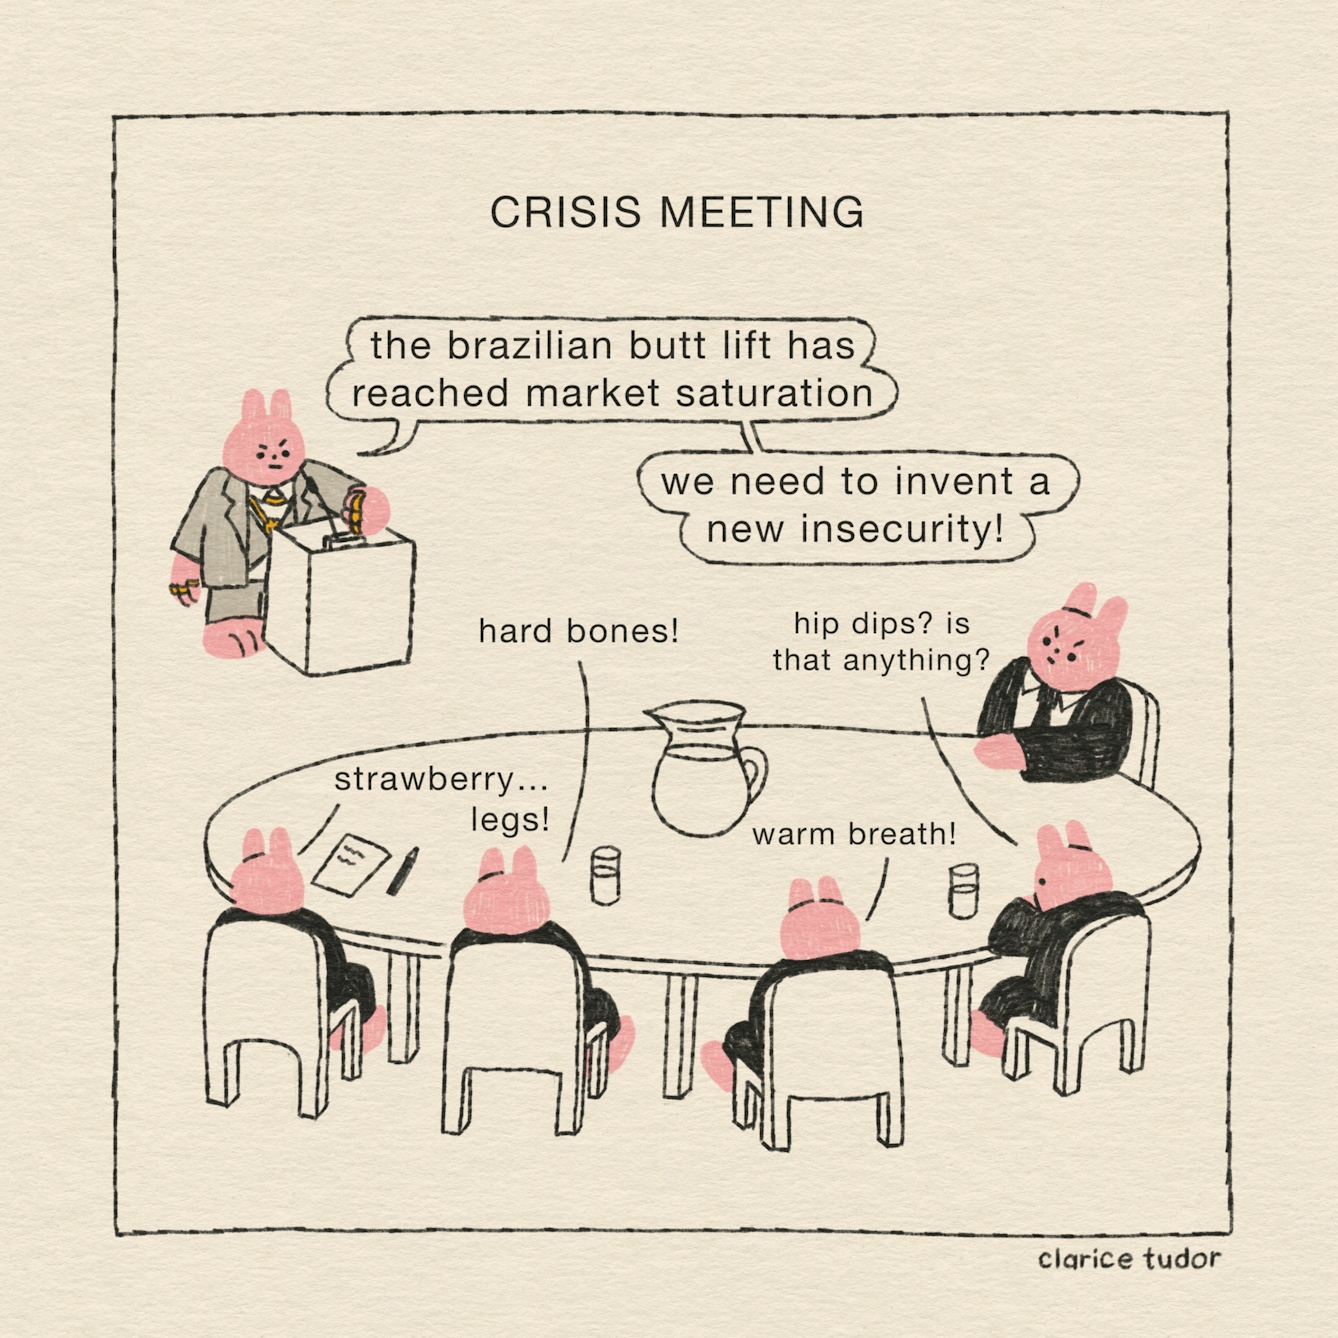 The CEO has called a crisis meeting. A team of five pink rabbits in black suits and ties sit round an oval table. Their boss is a bigger, pink rabbit in a grey suit, wearing lots of gold necklaces and rings. Standing on a podium, with his fist banging, the CEO rabbit says: “The brazillian butt lift has reached market saturation, we need to invent a new insecurity!”.  One by one, the team shout out their ideas. “Strawberry… legs! Hard bones! Warm breath! Hip dips - is that anything?”, they say. 